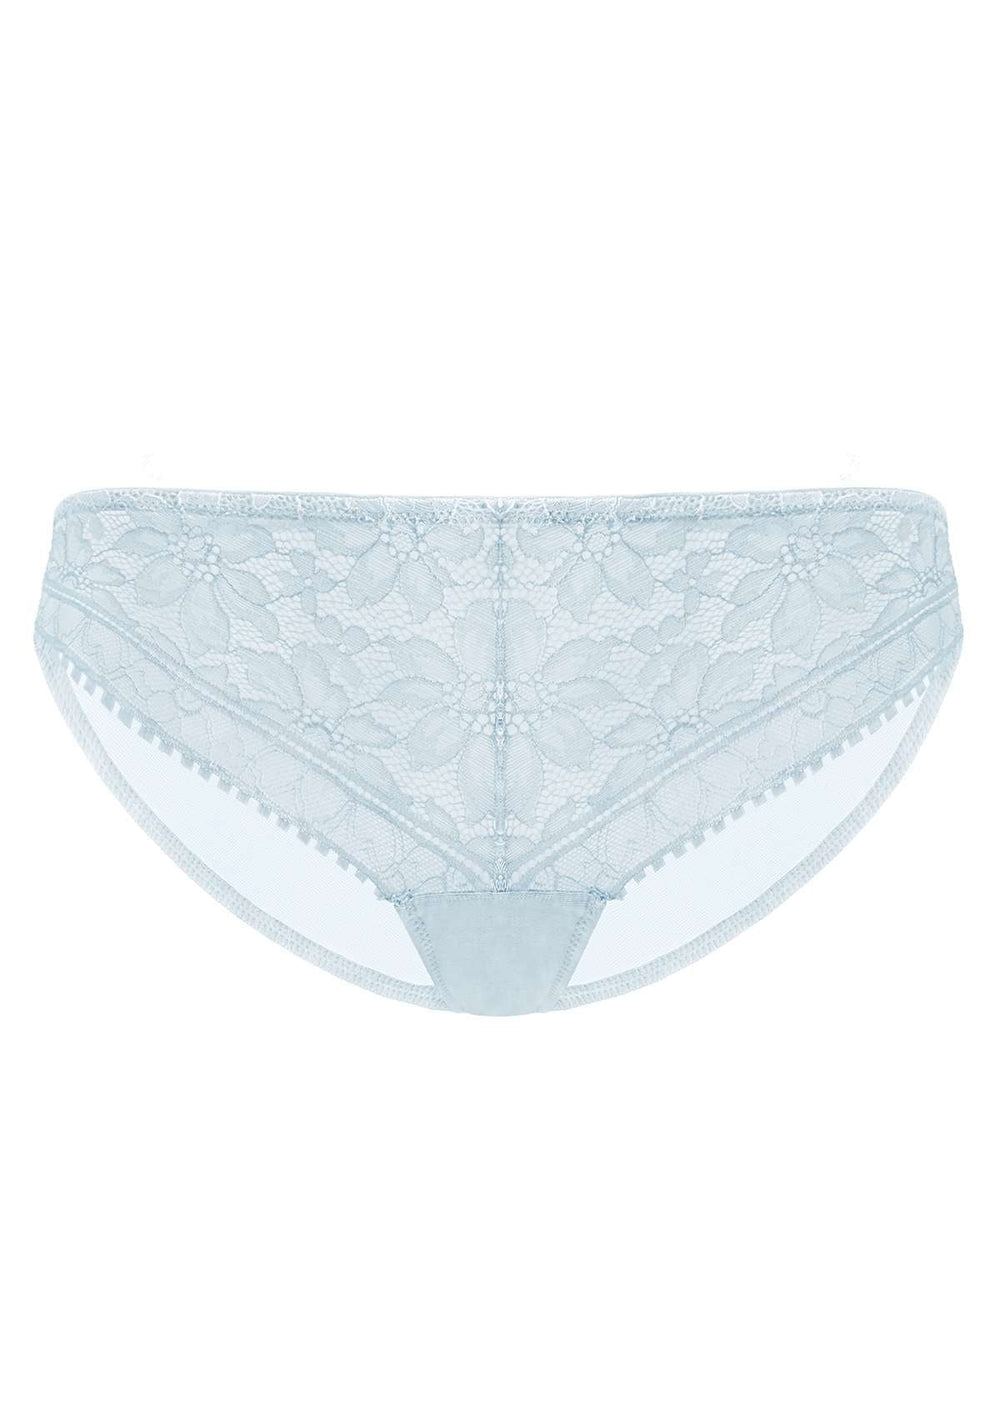 HSIA Silene Sheer Lace Mesh Hipster Underwear 3 Pack